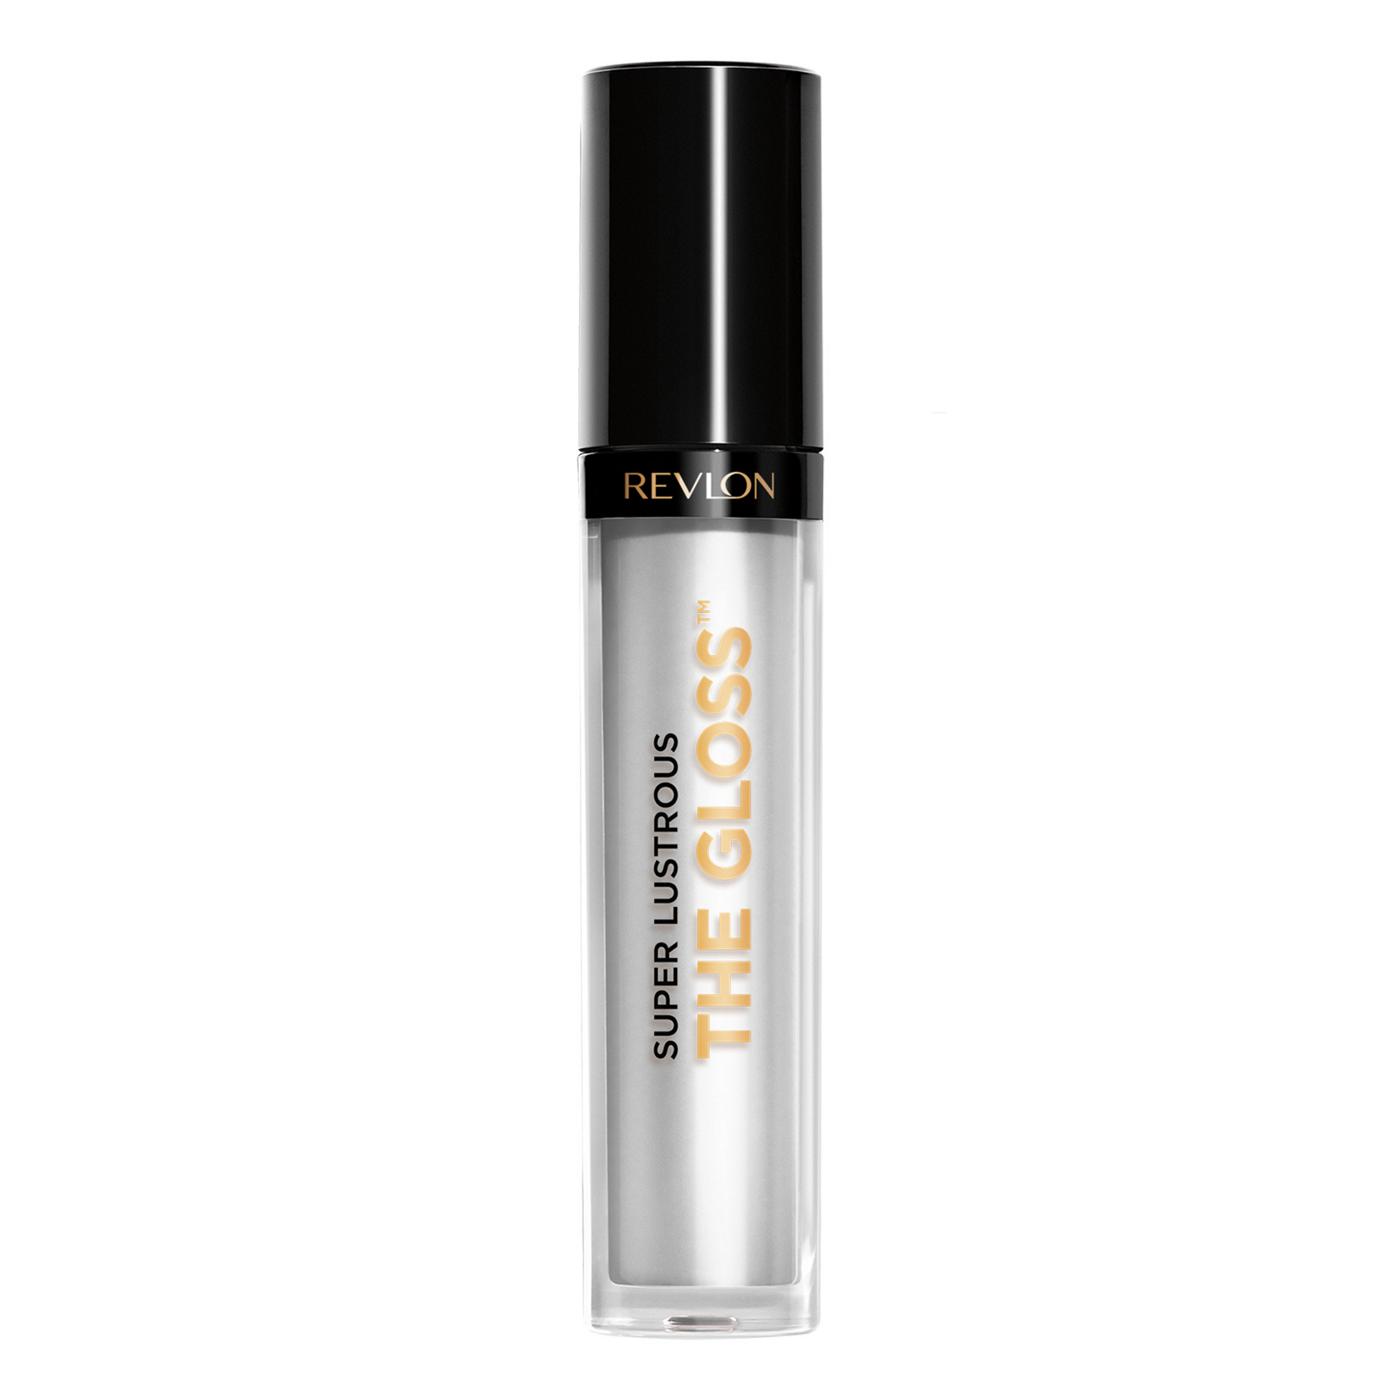 Revlon Super Lustrous The Gloss, 200 Crystal Clear; image 1 of 7